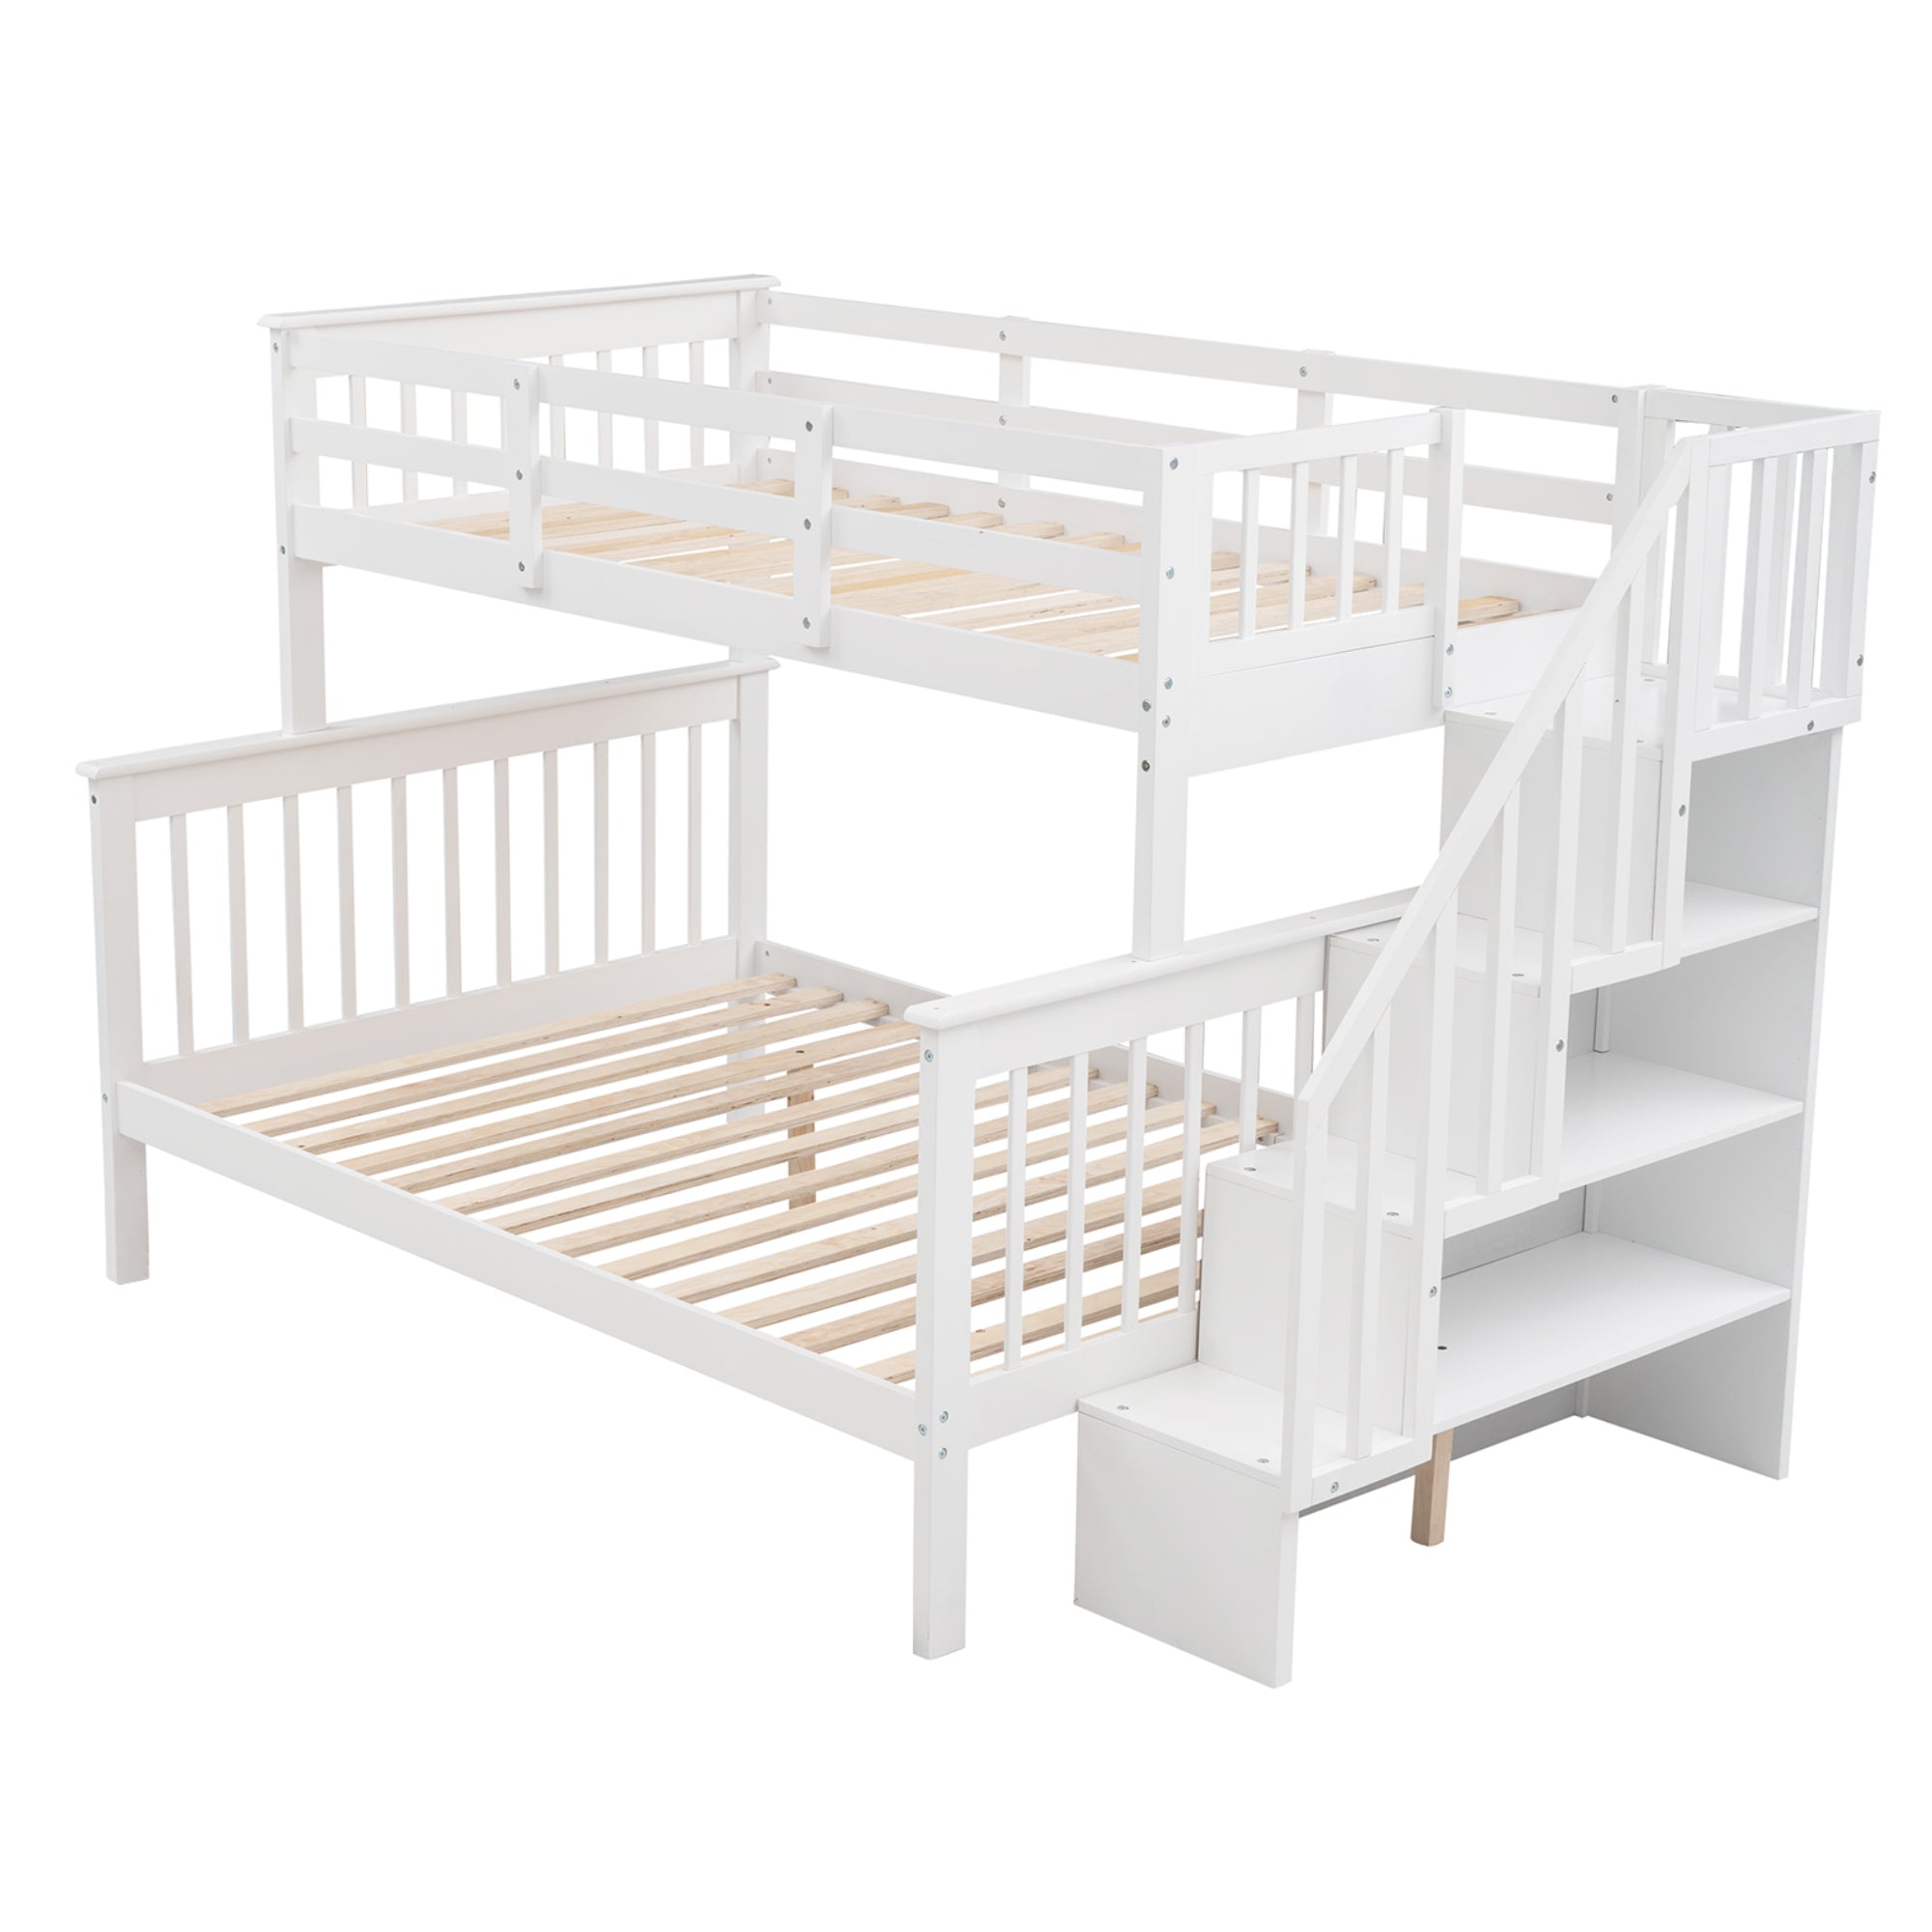 Stairway Twin-Over-Full Bunk Bed - White color